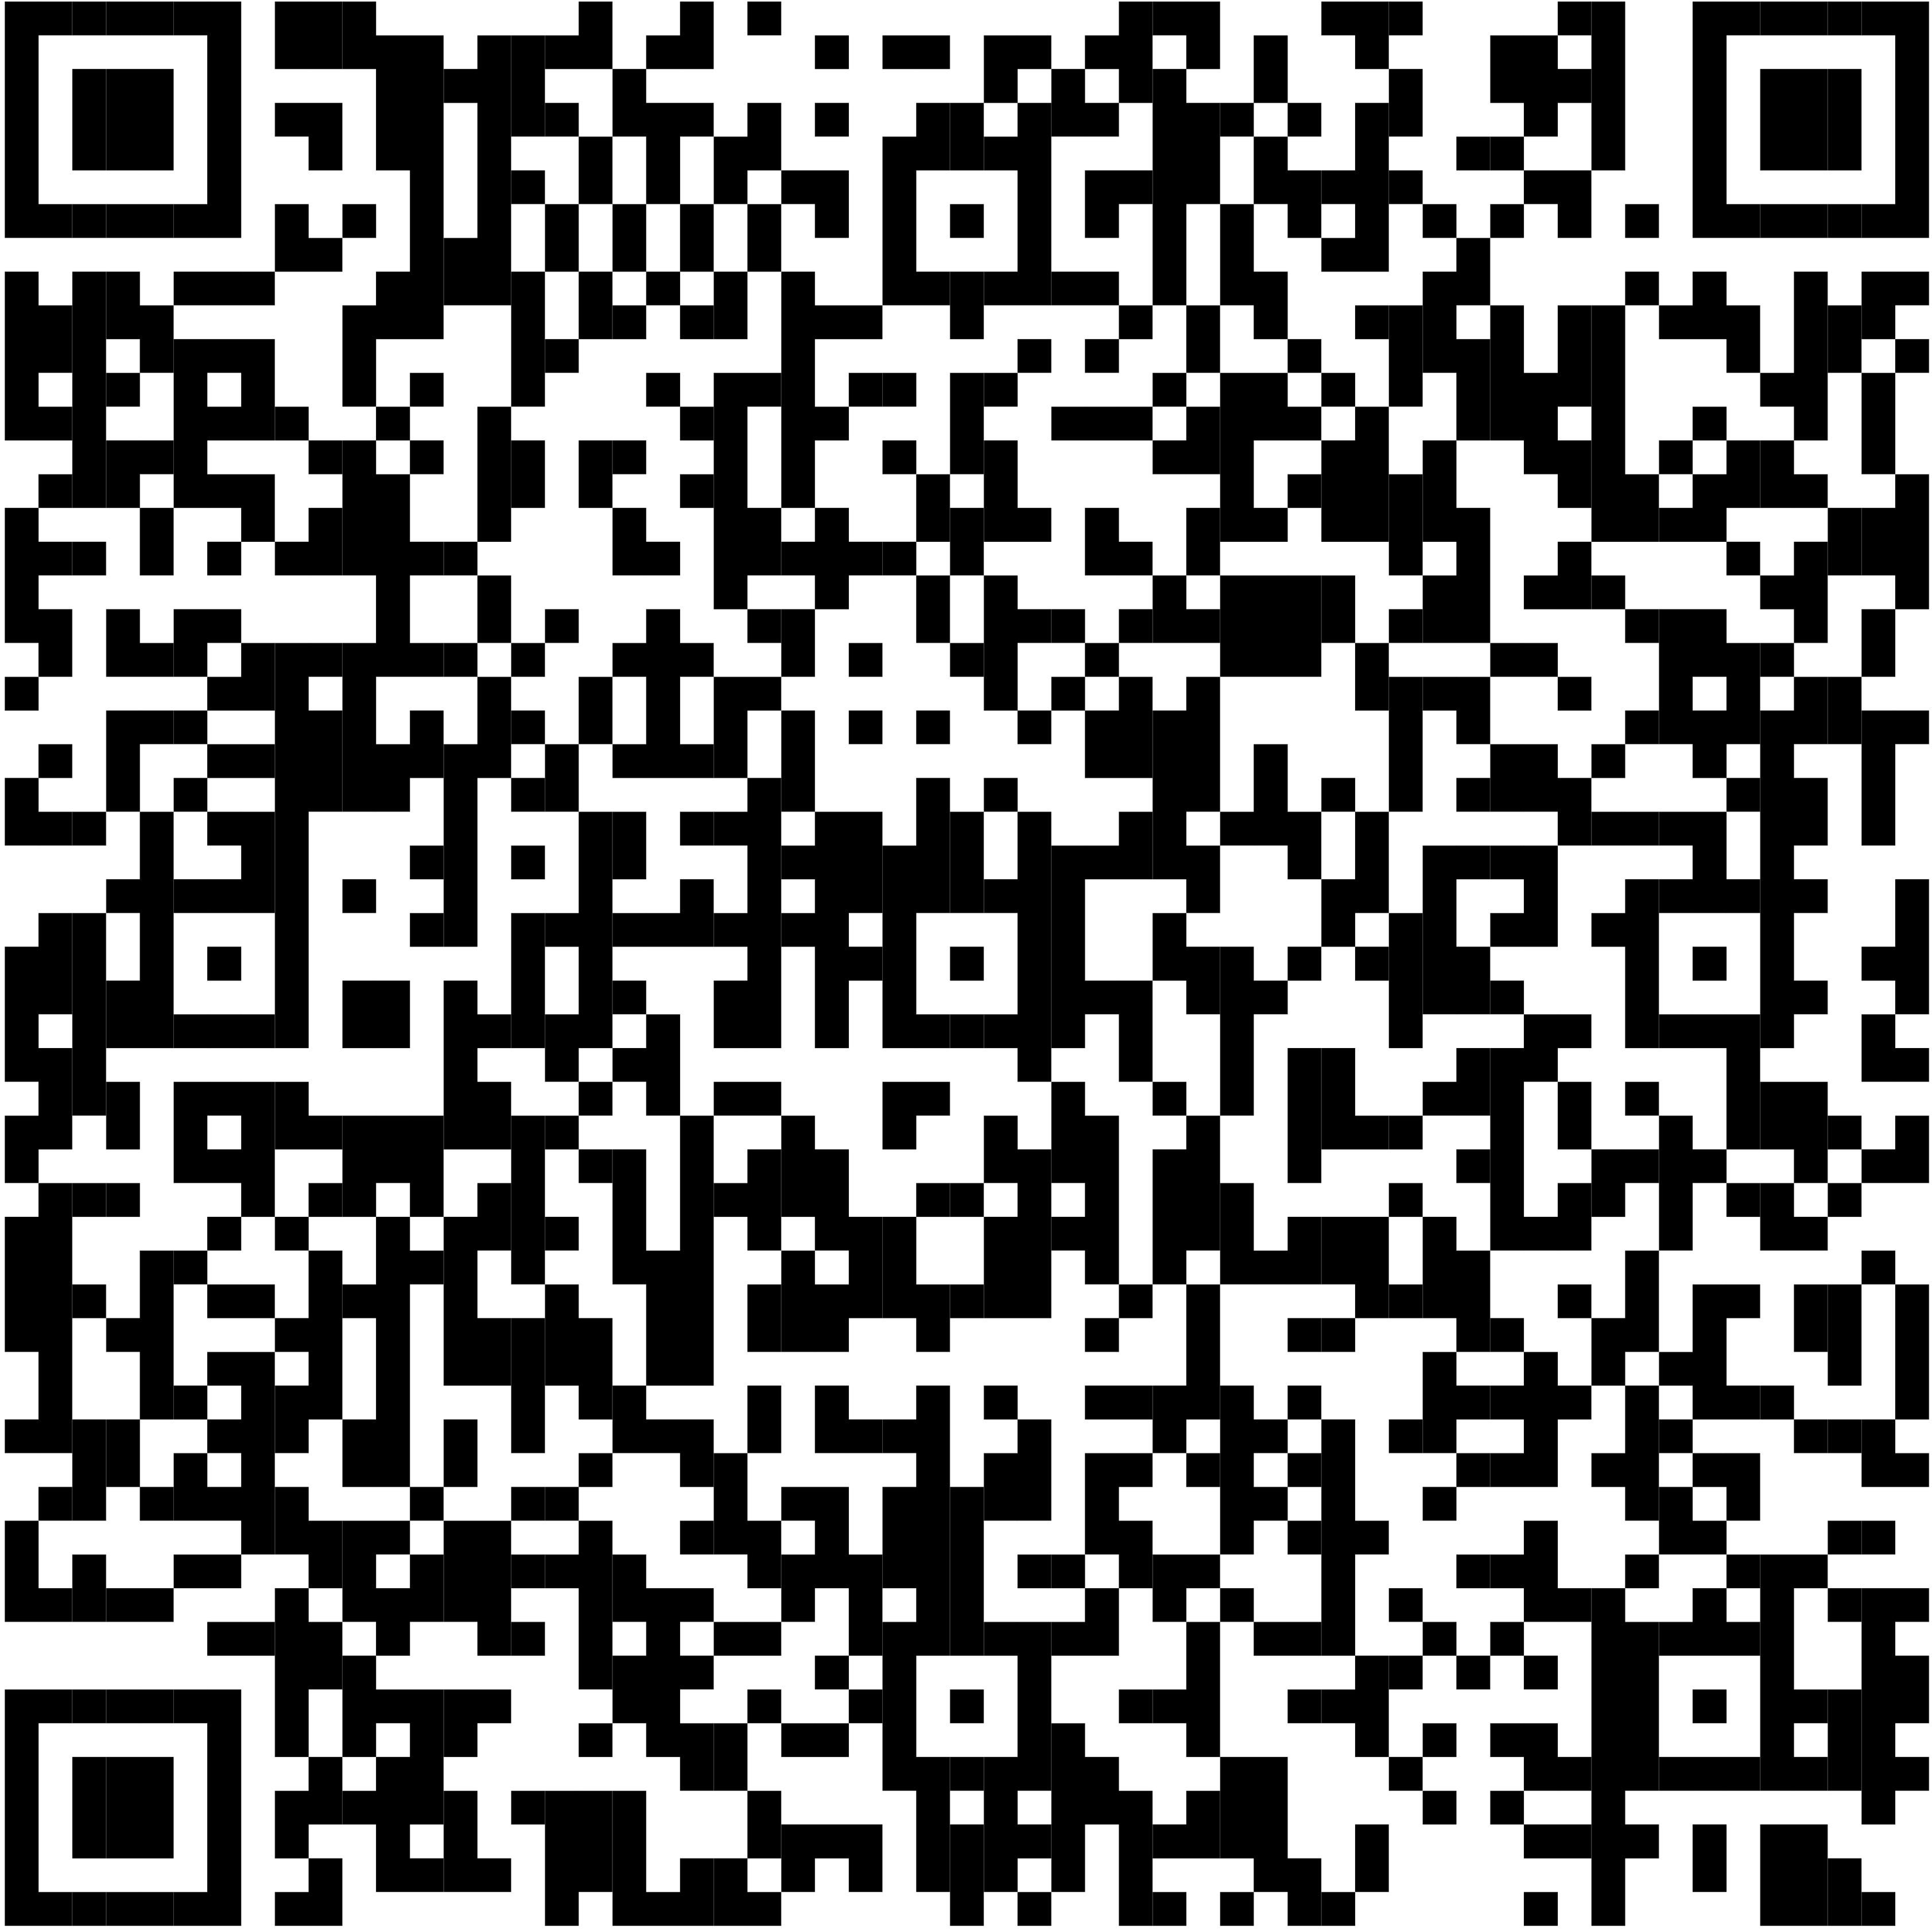 QR code for contact data